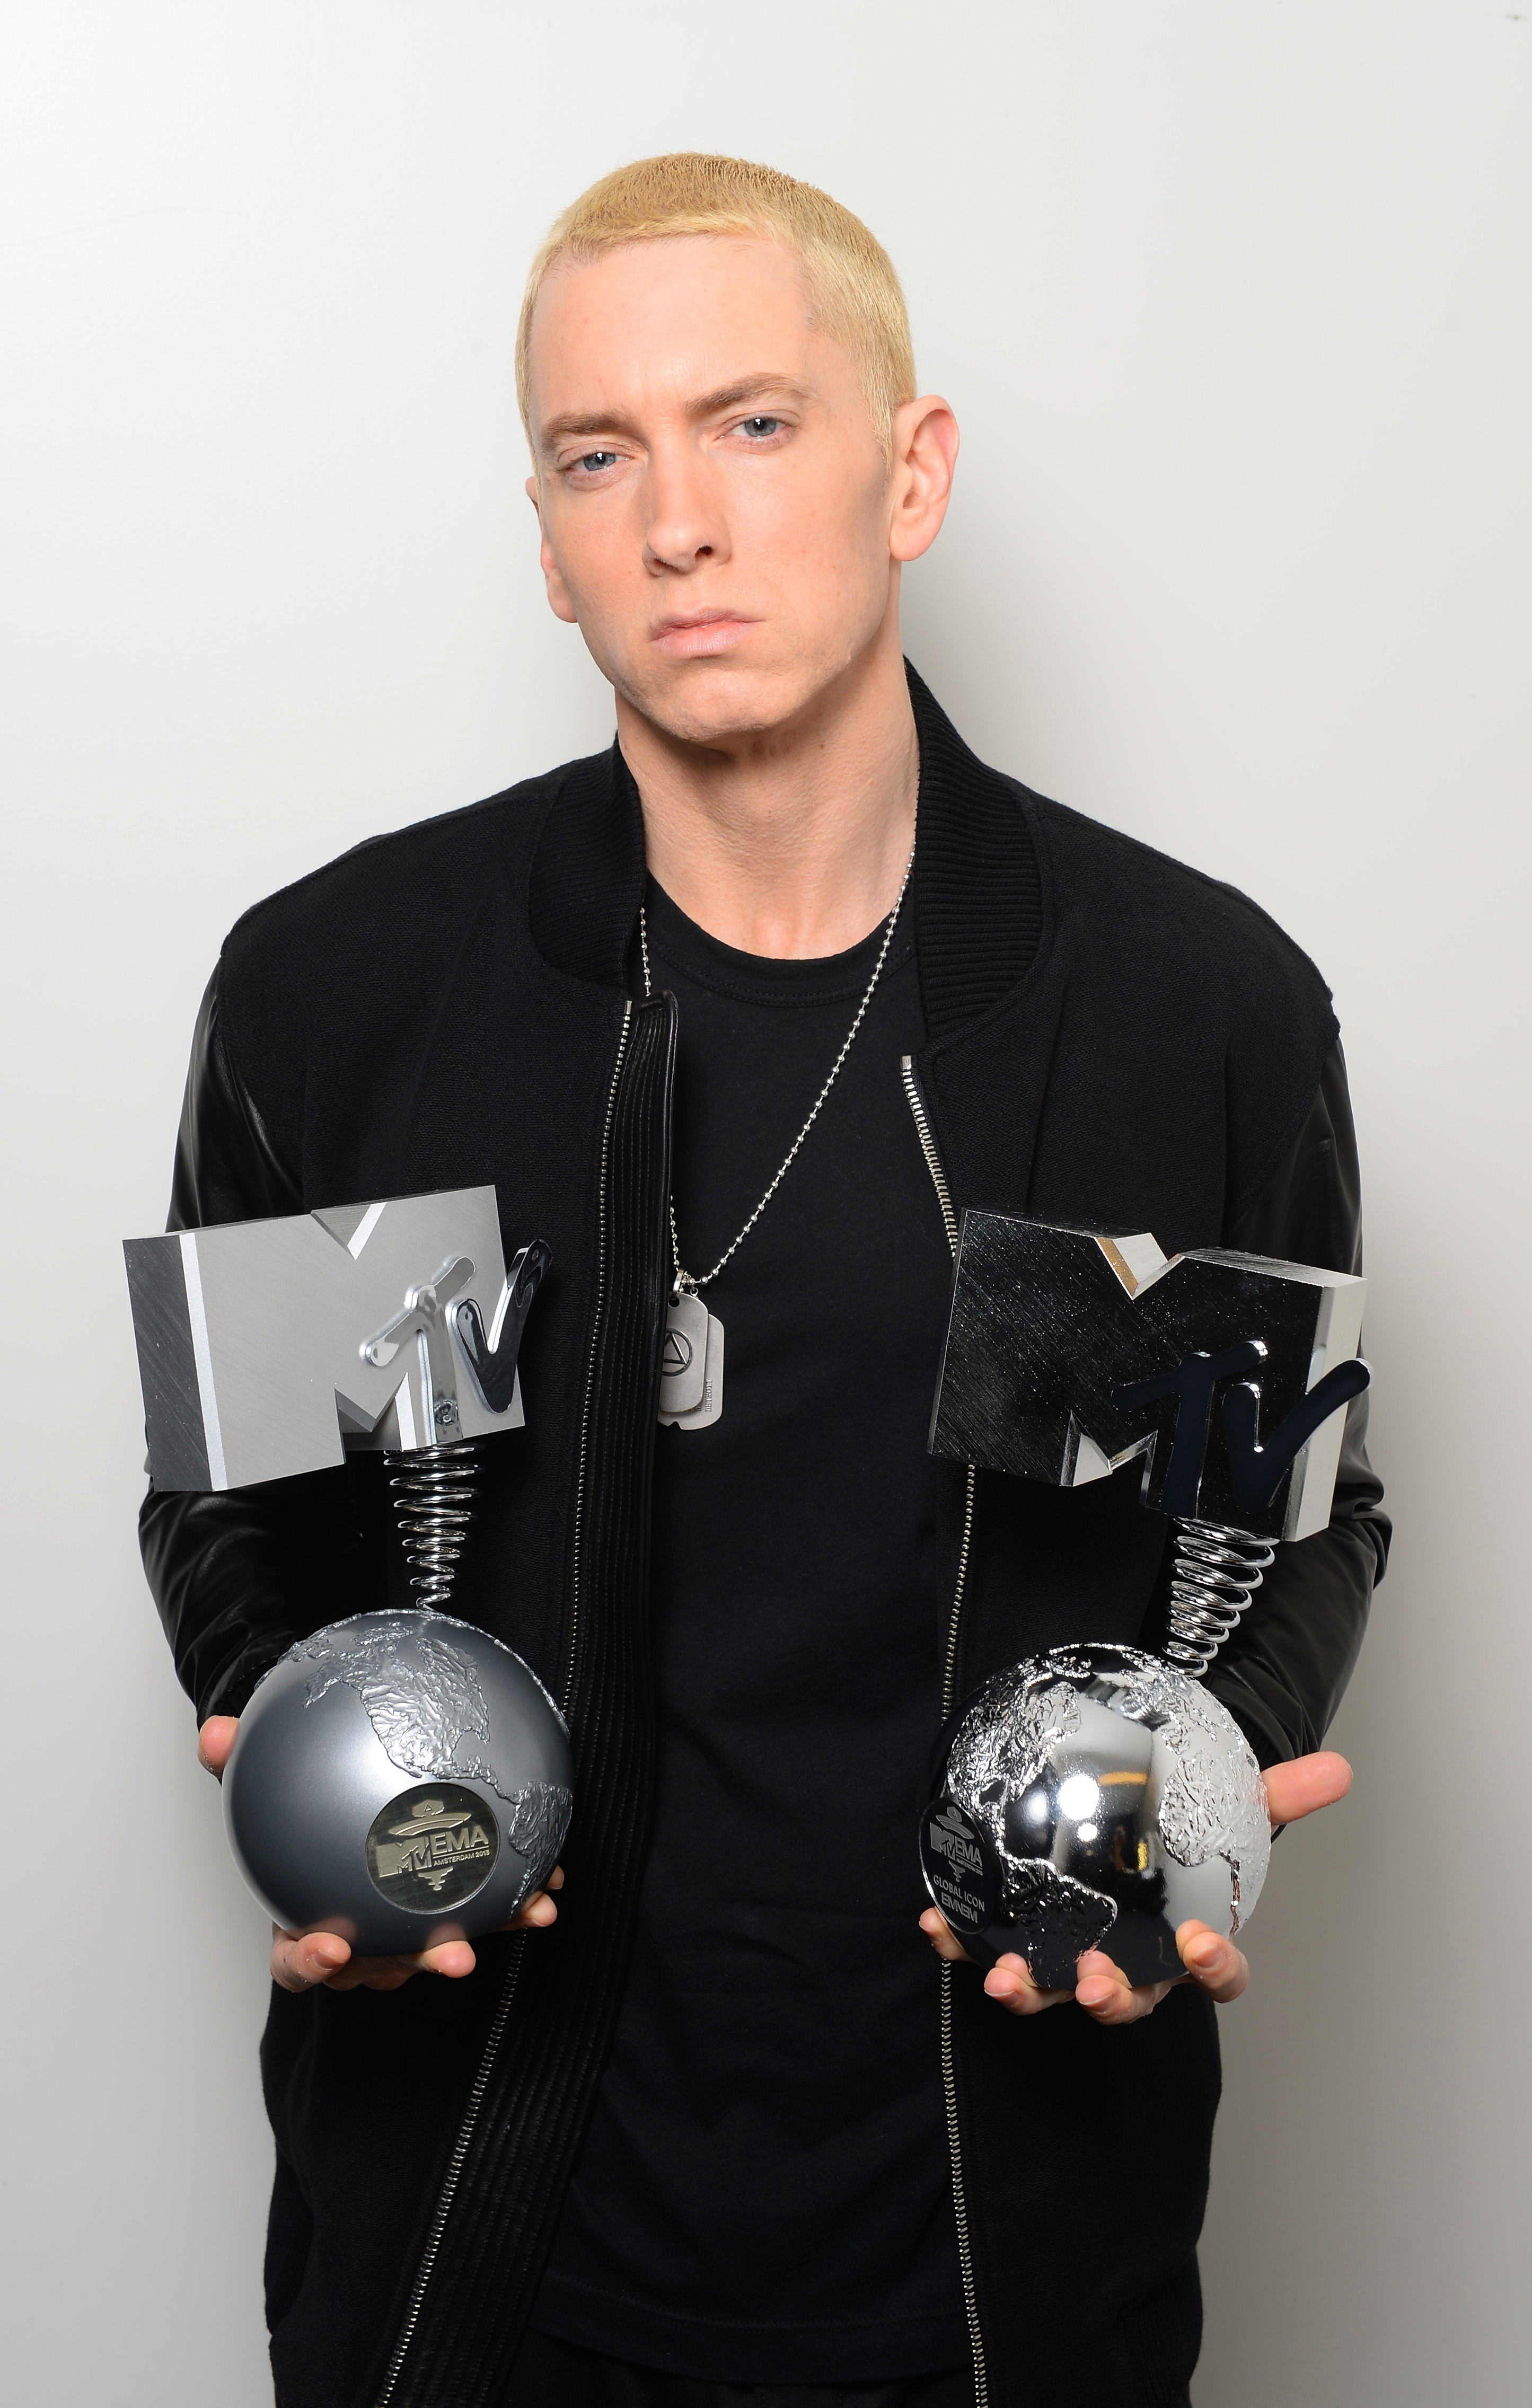 Eminem with his awards at the MTV EMA's 2013 on November 10, 2013, in Amsterdam, Netherlands. | Source: Getty Images